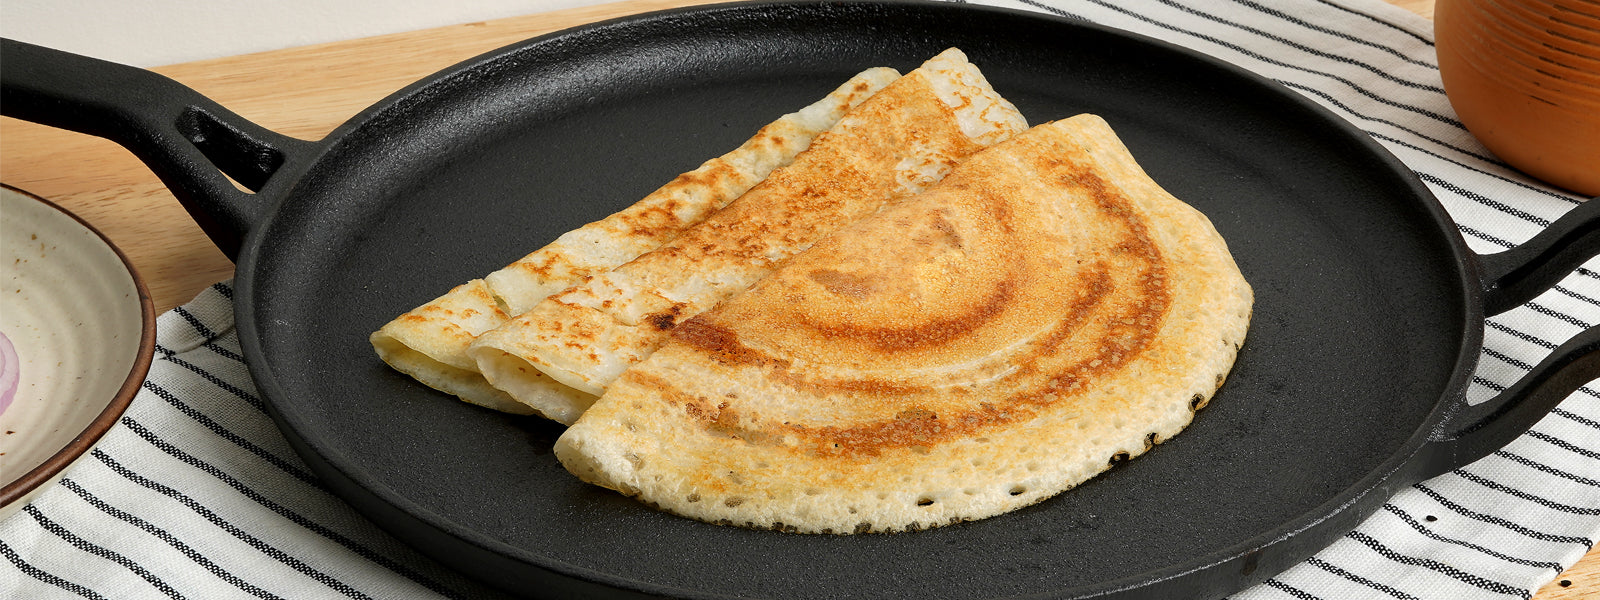 Best Non-Stick Dosa Tawa for Easy Cooking - PotsandPans India